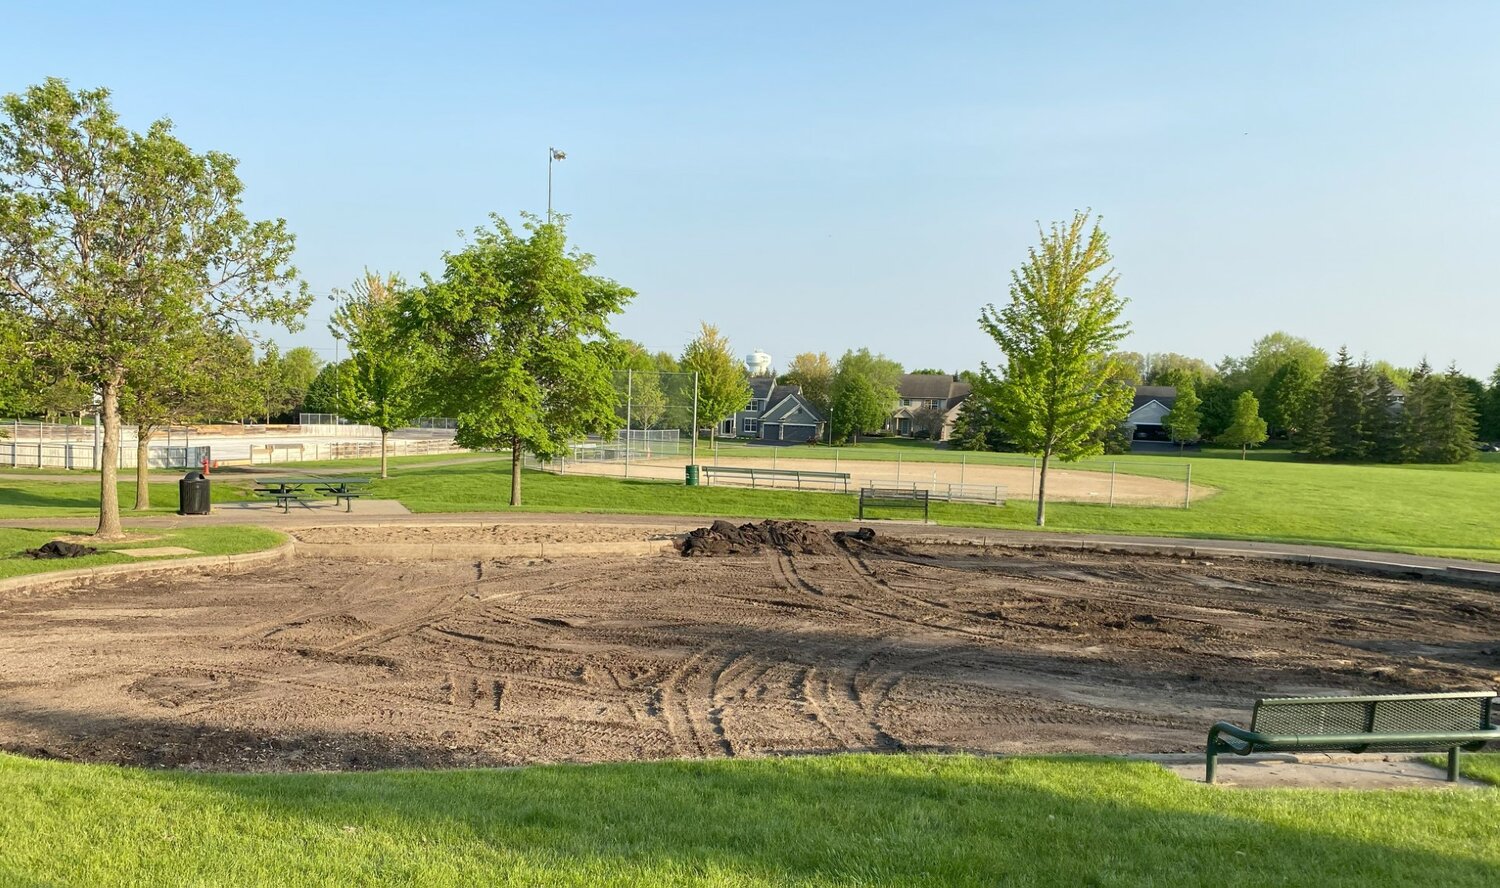 The cleared playground area at Peter Thompson Park awaiting new equipment installation. Photo by Dan Solovitz